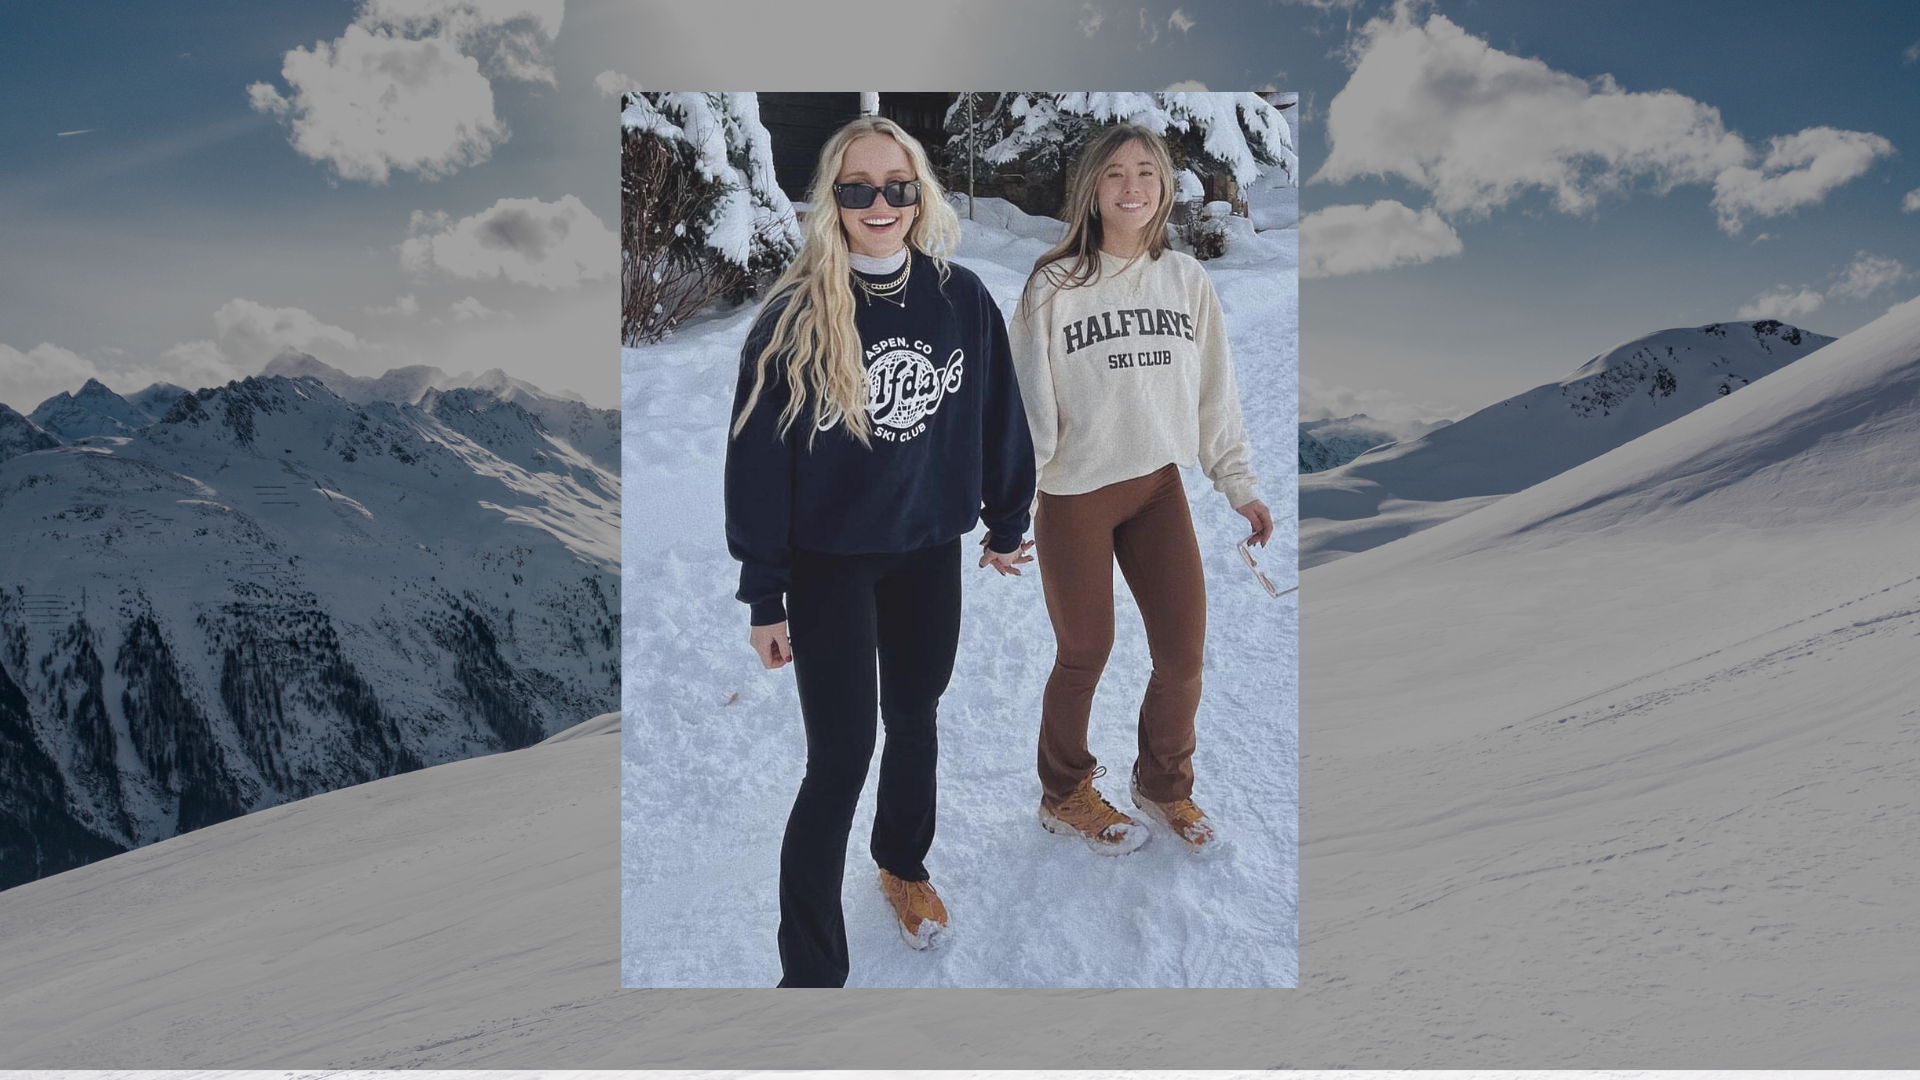 Michigan native makes it on Forbes 30 under 30 list for high-end women's ski  apparel brand